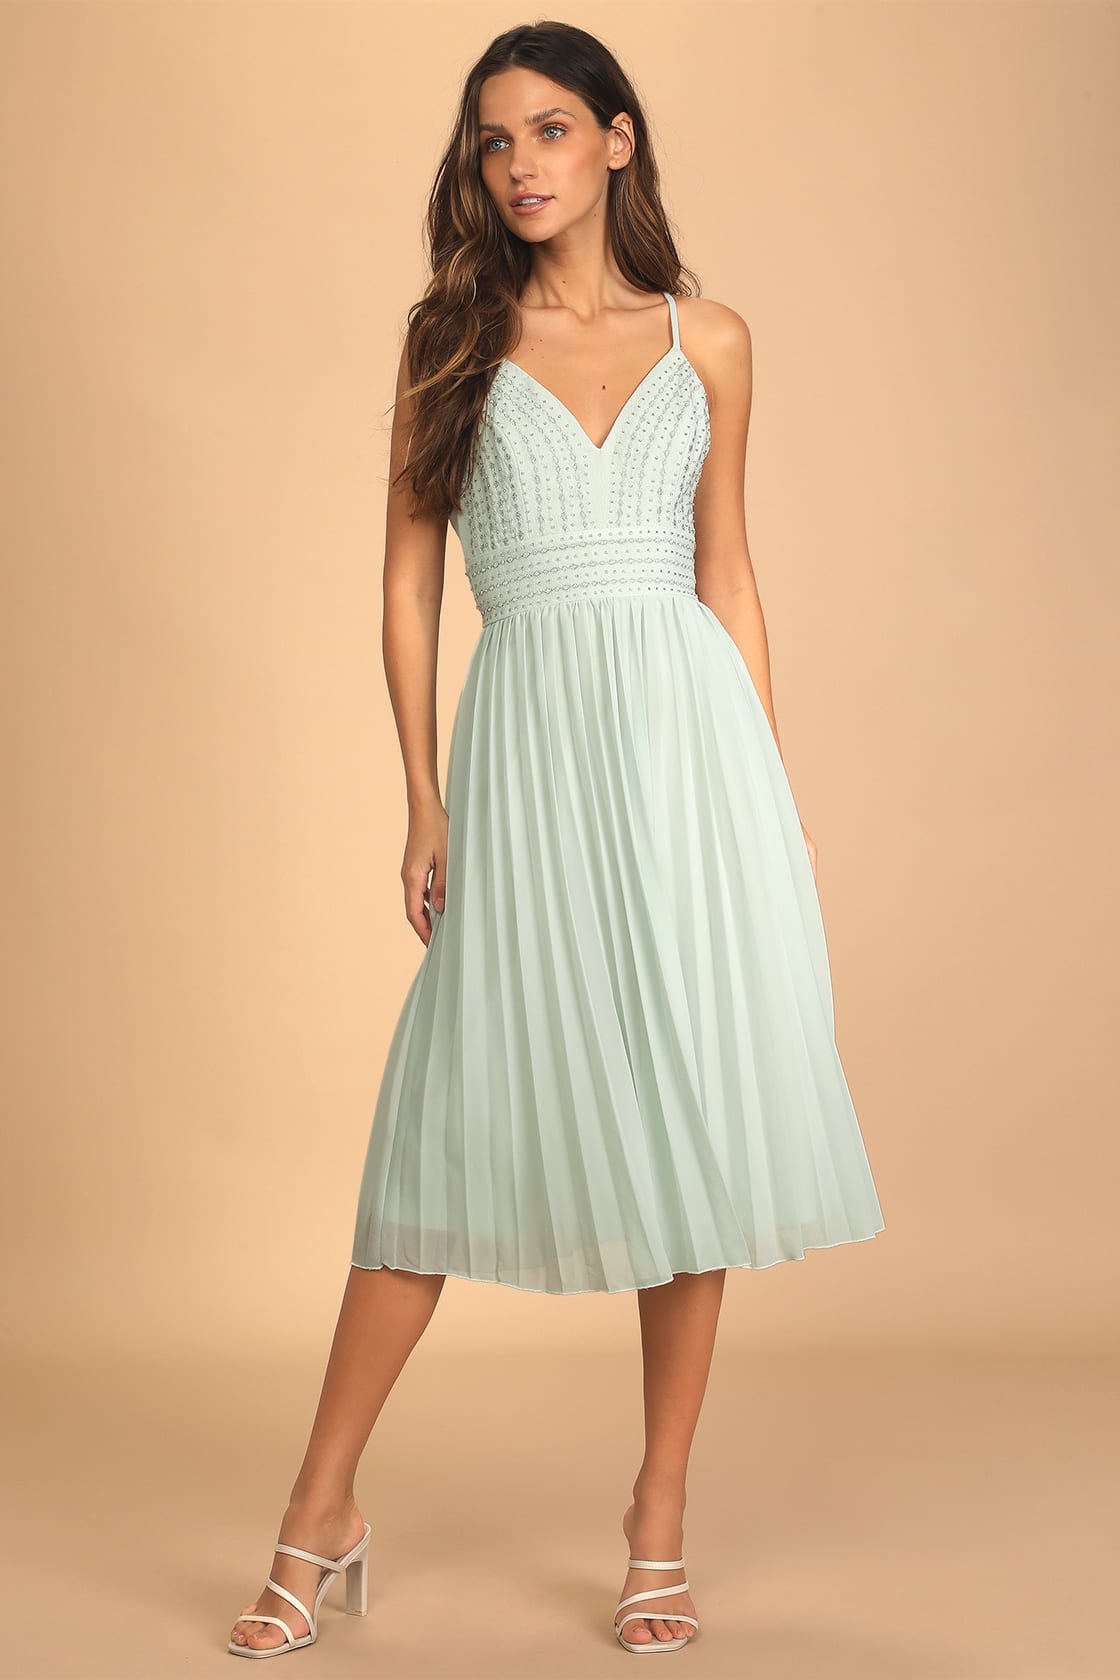 What color shoes to wear with mint green dress: white